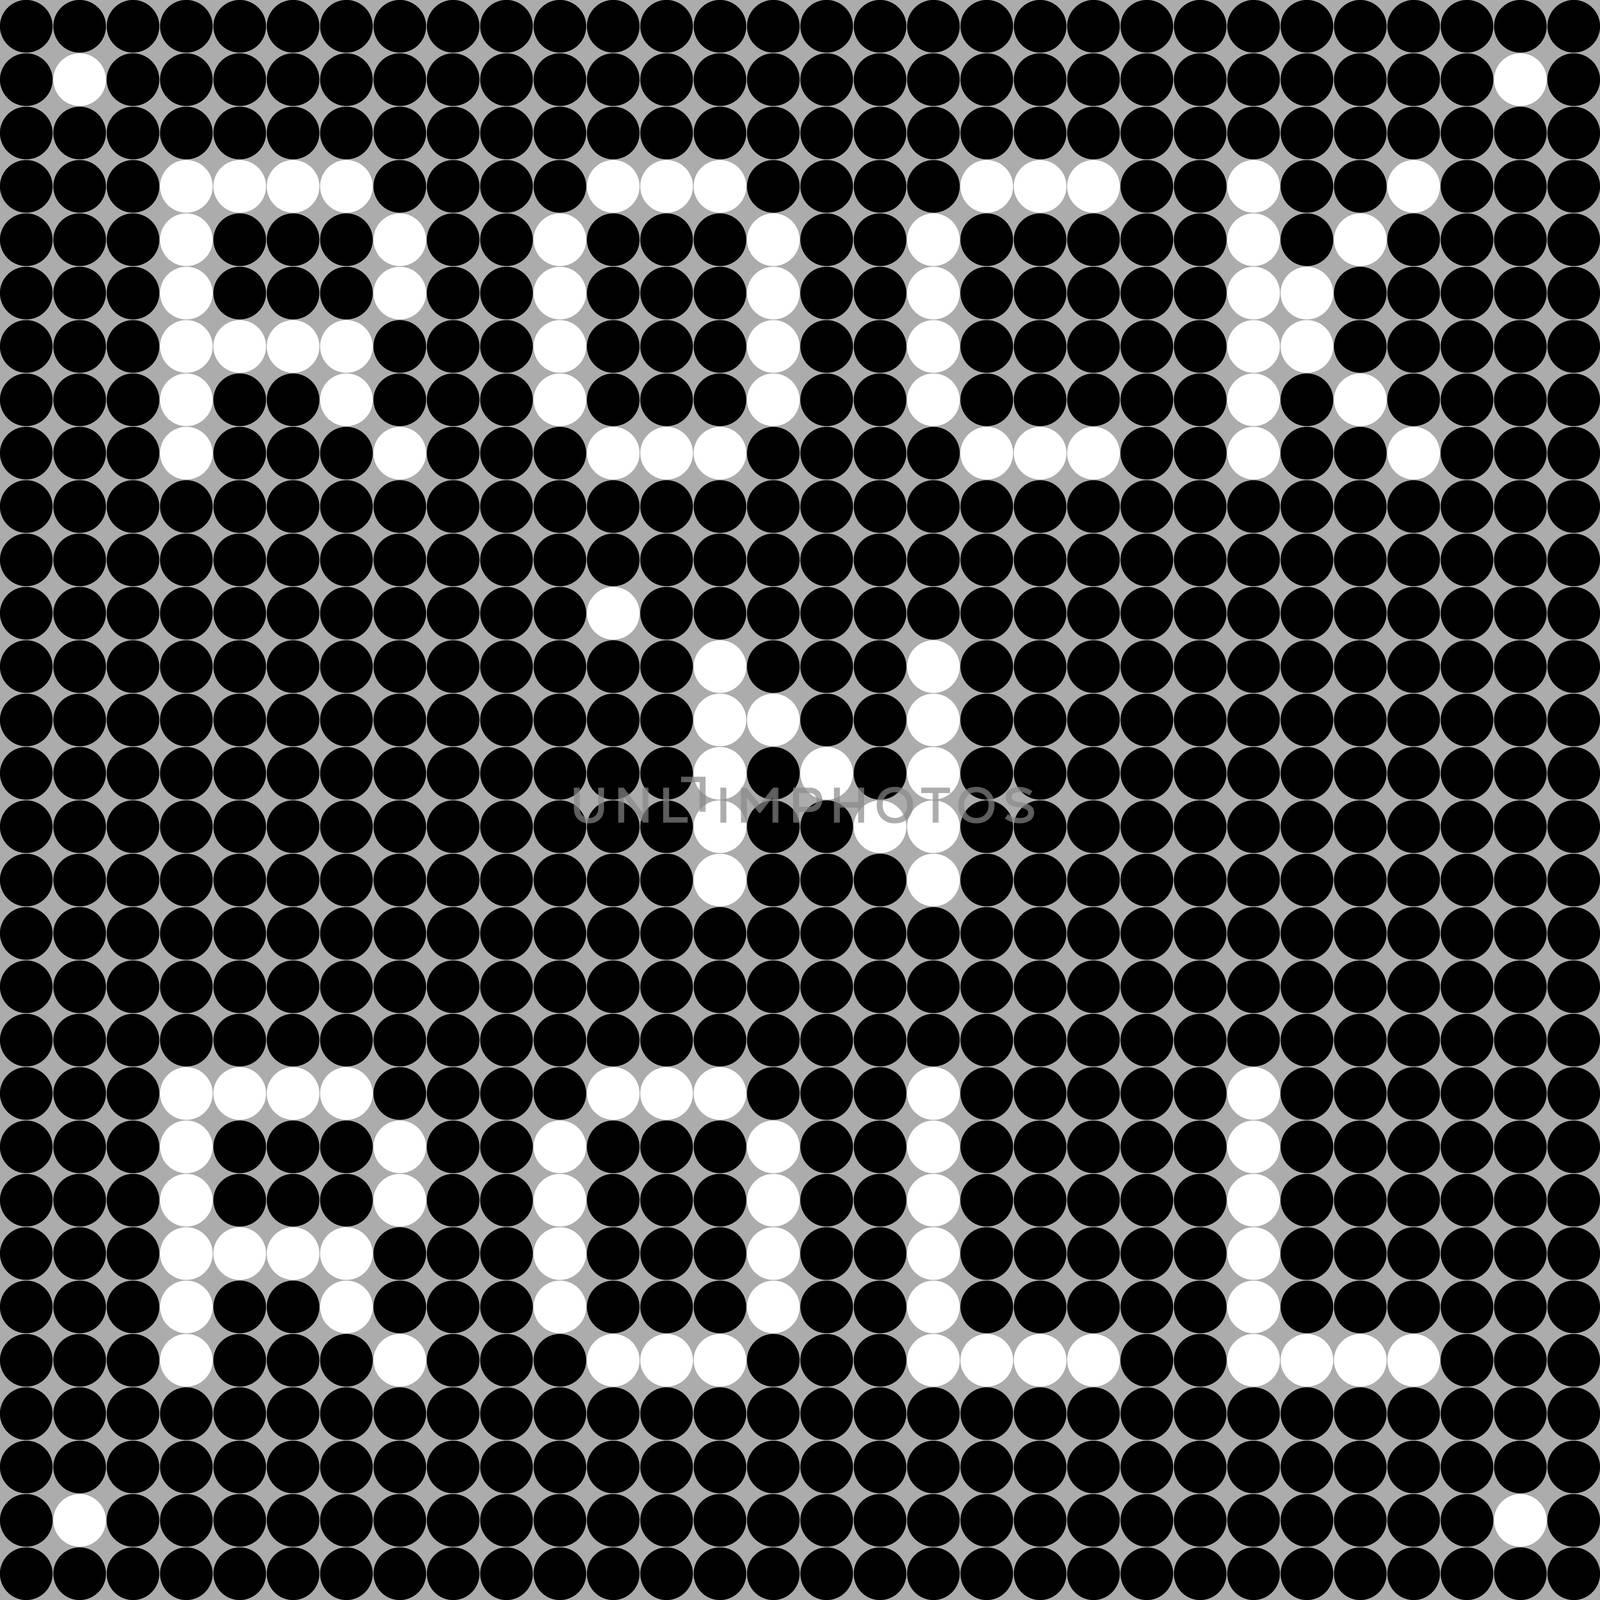 Rock n' roll card, pixel illustration of a scoreboard composition with digital text made of dots